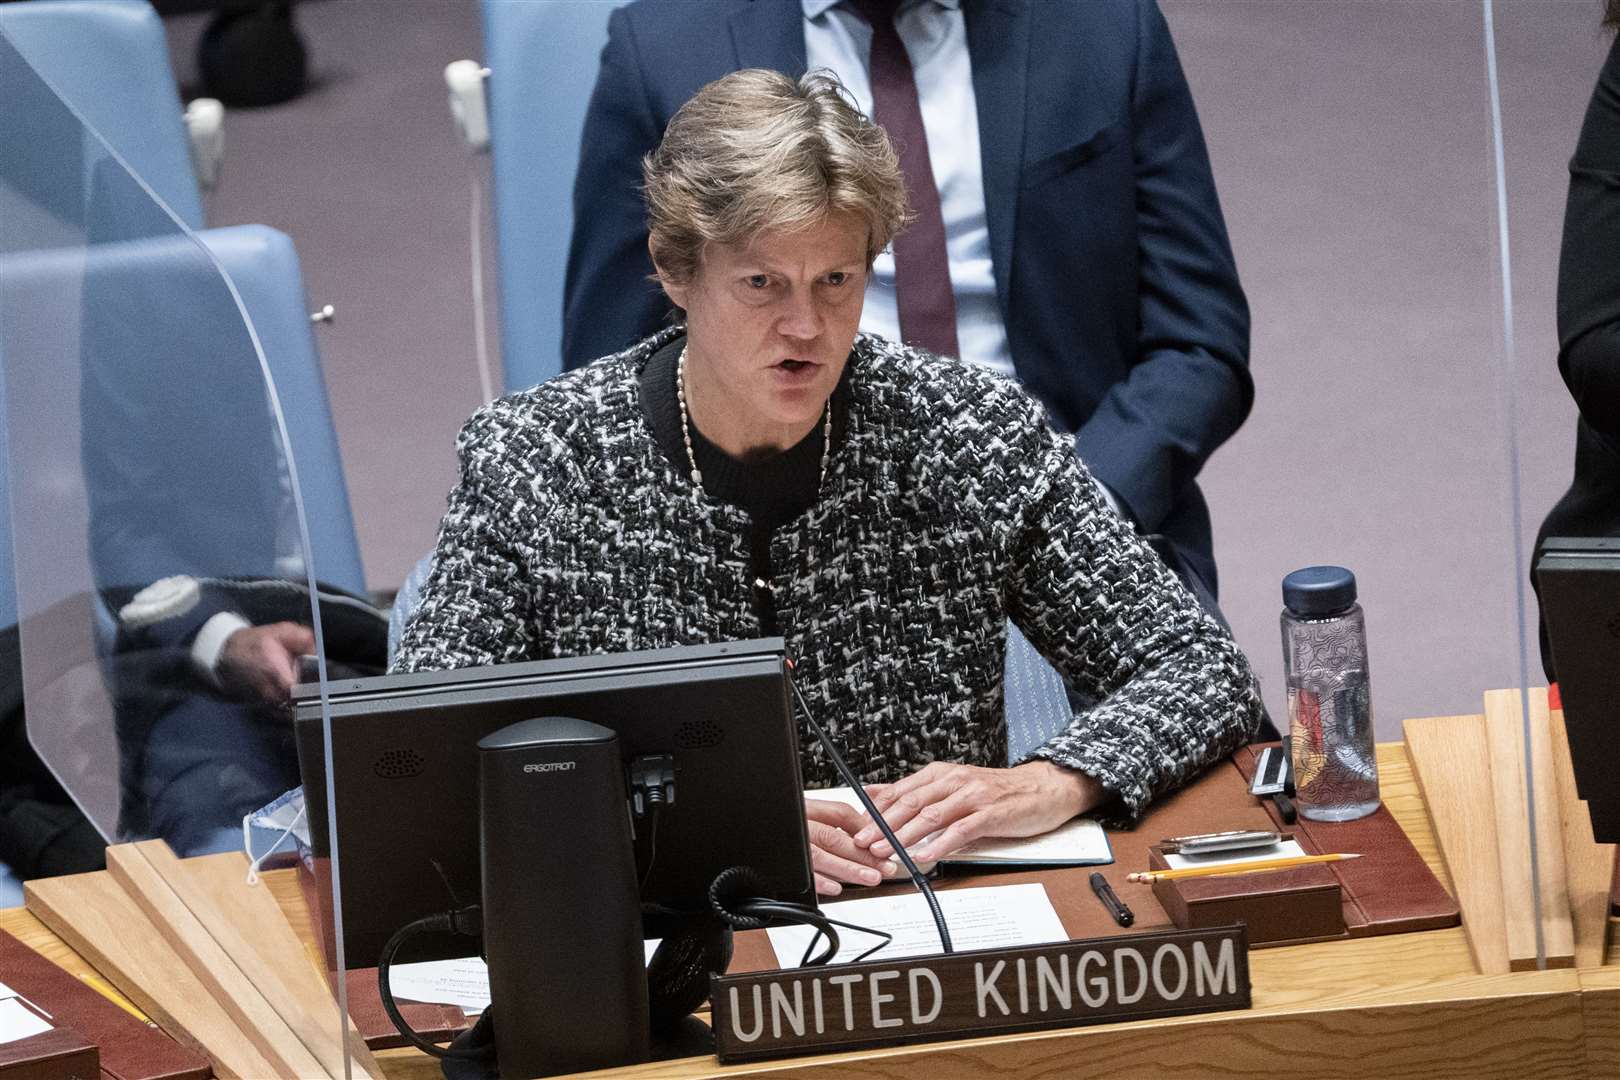 Barbara Woodward, permanent representative of the United Kingdom to the United Nations, speaks during a meeting of the security council (John Minchillo/PA)